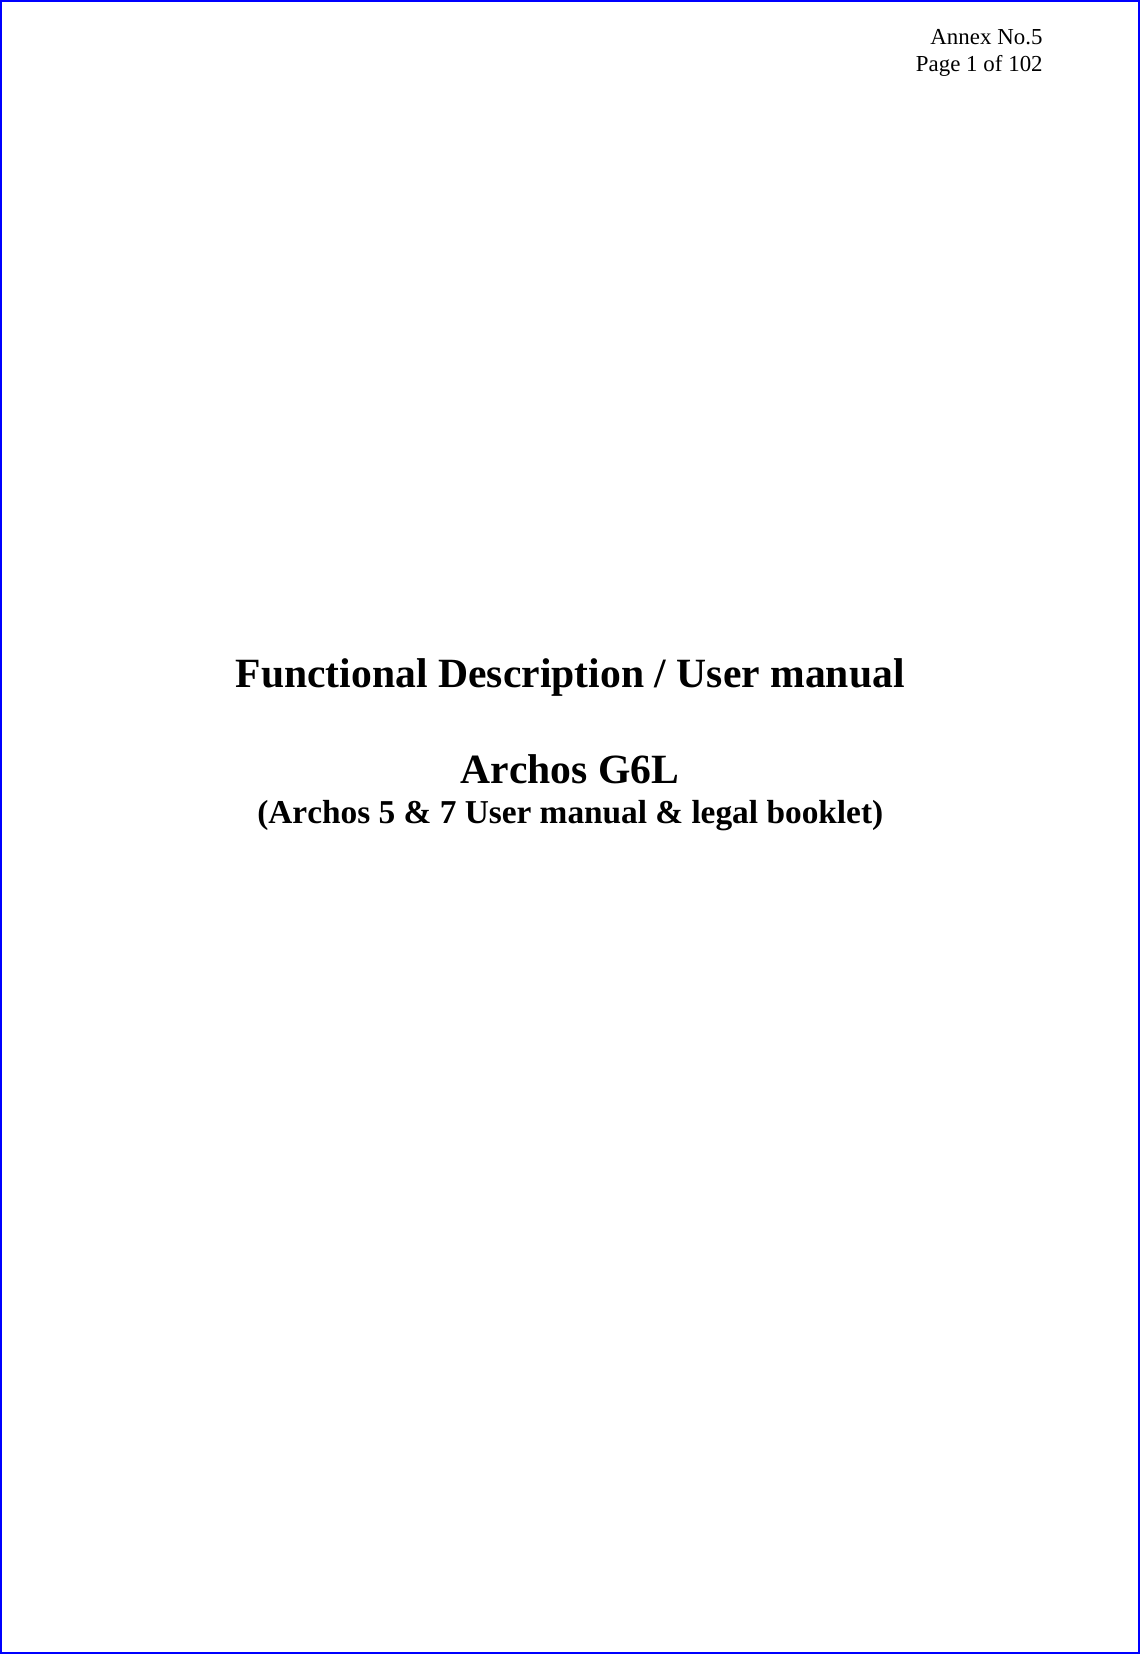 Annex No.5 Page 1 of 102                     Functional Description / User manual  Archos G6L (Archos 5 &amp; 7 User manual &amp; legal booklet) 